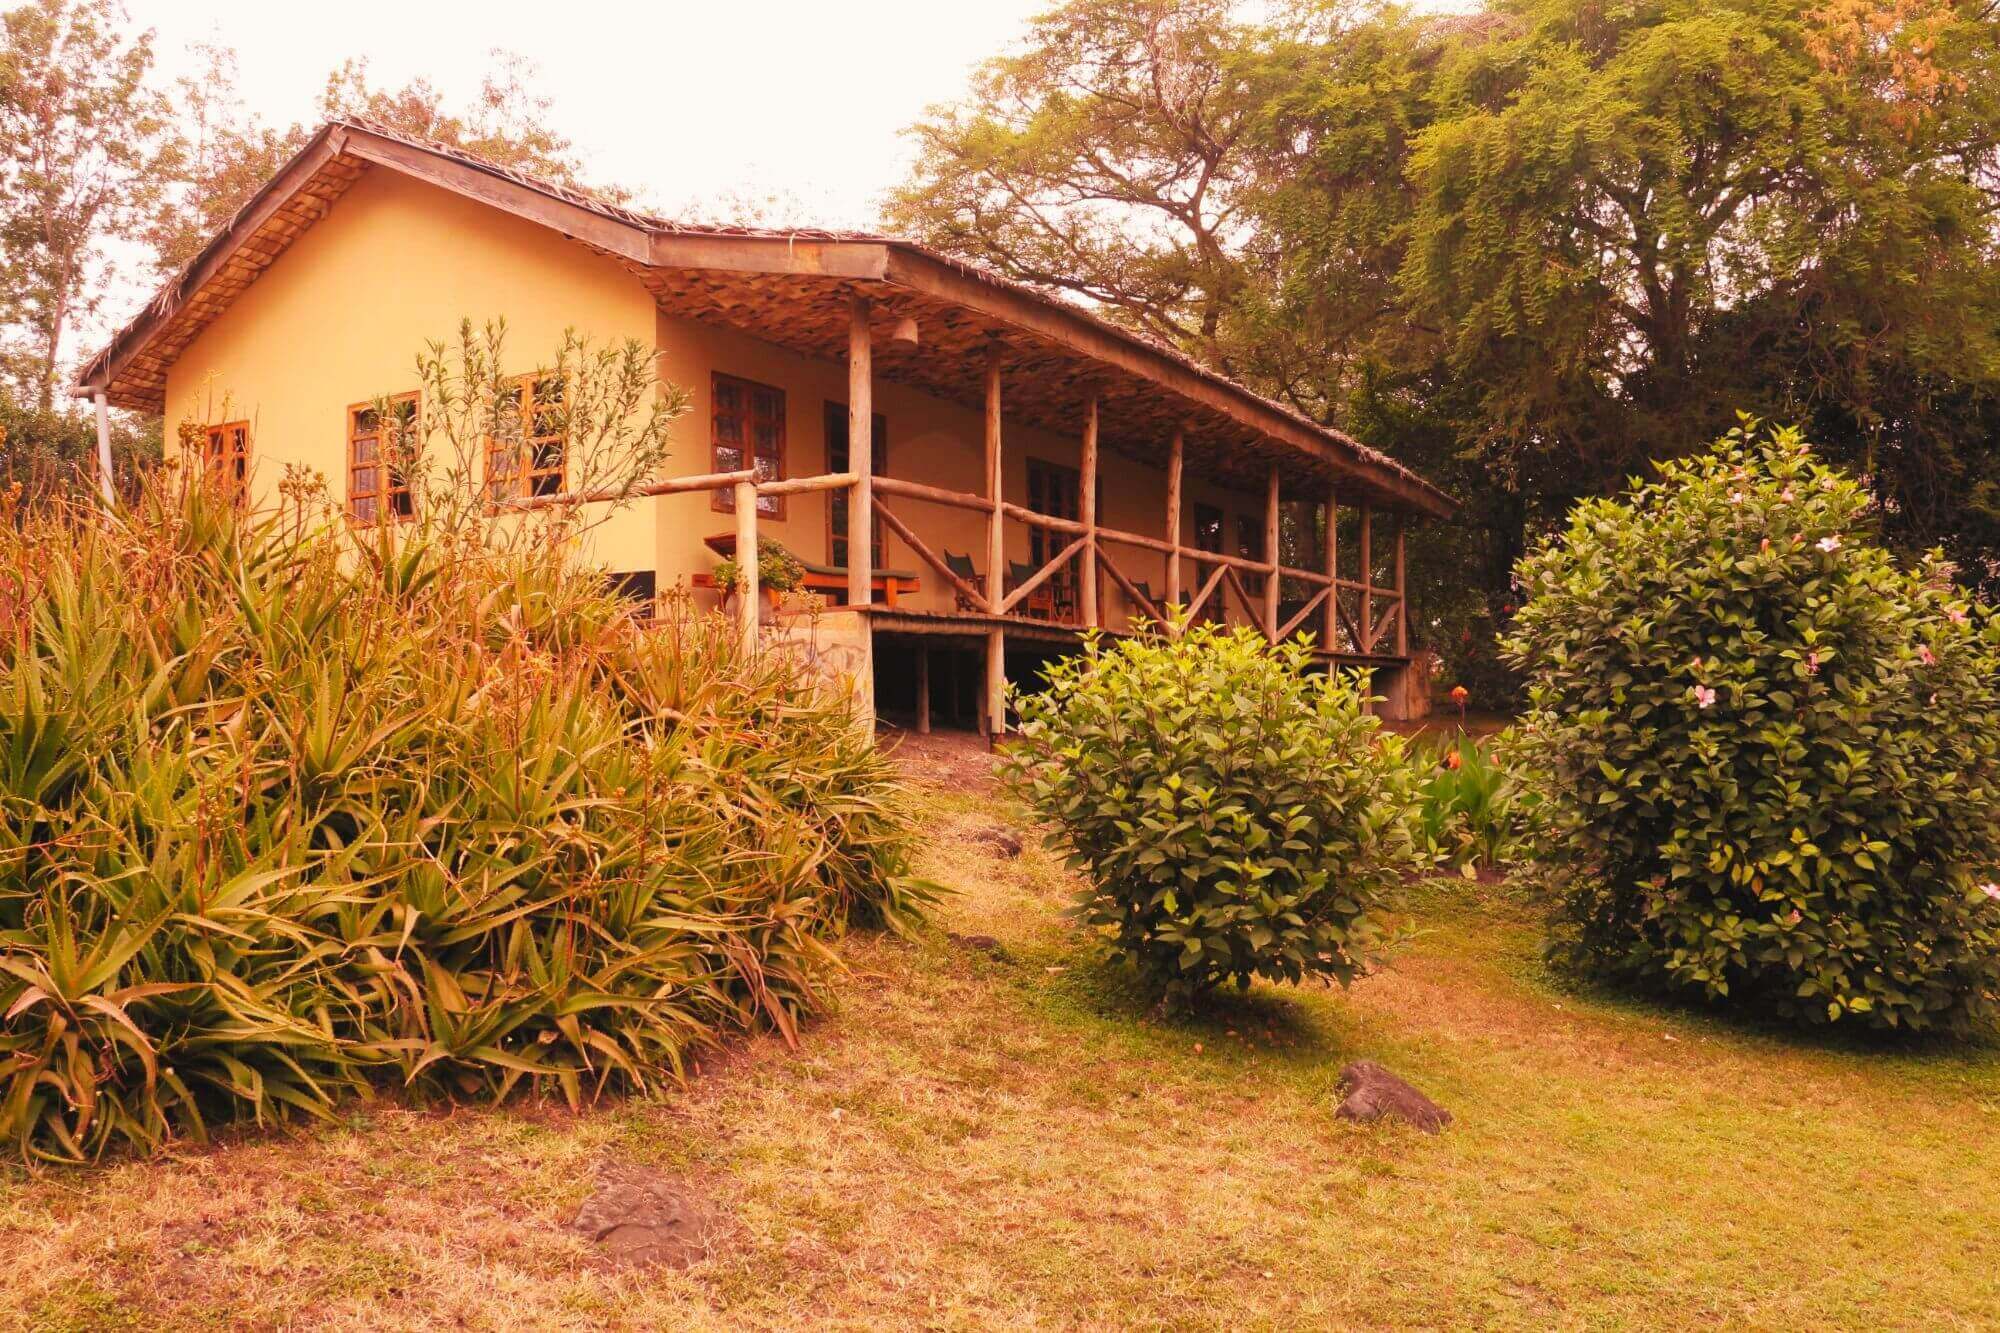 The African House (4)